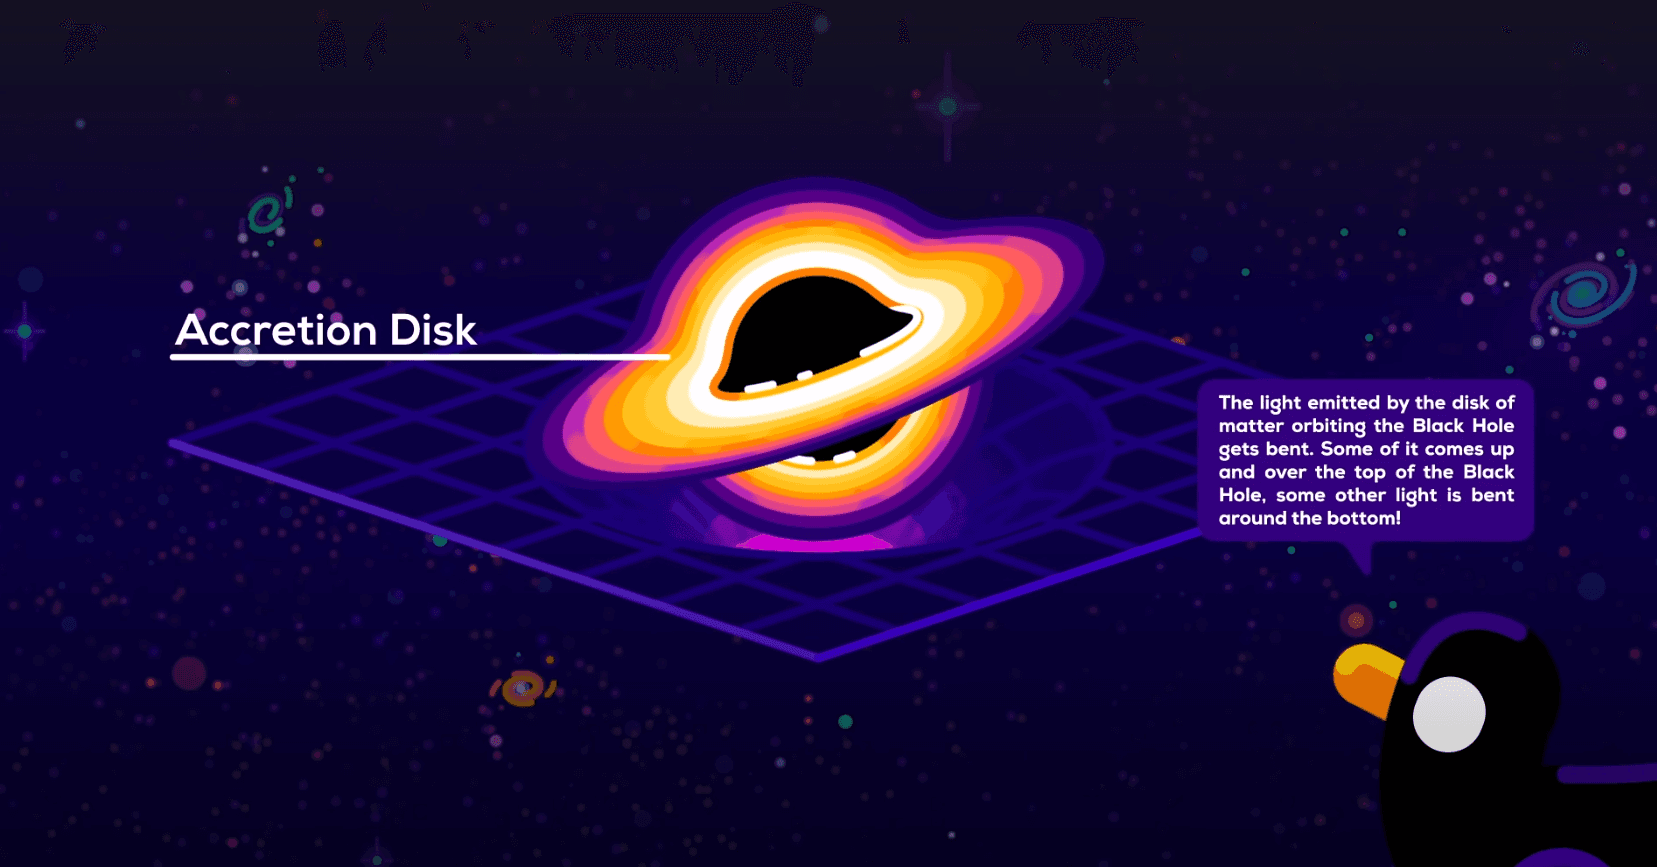 Acceretion disk